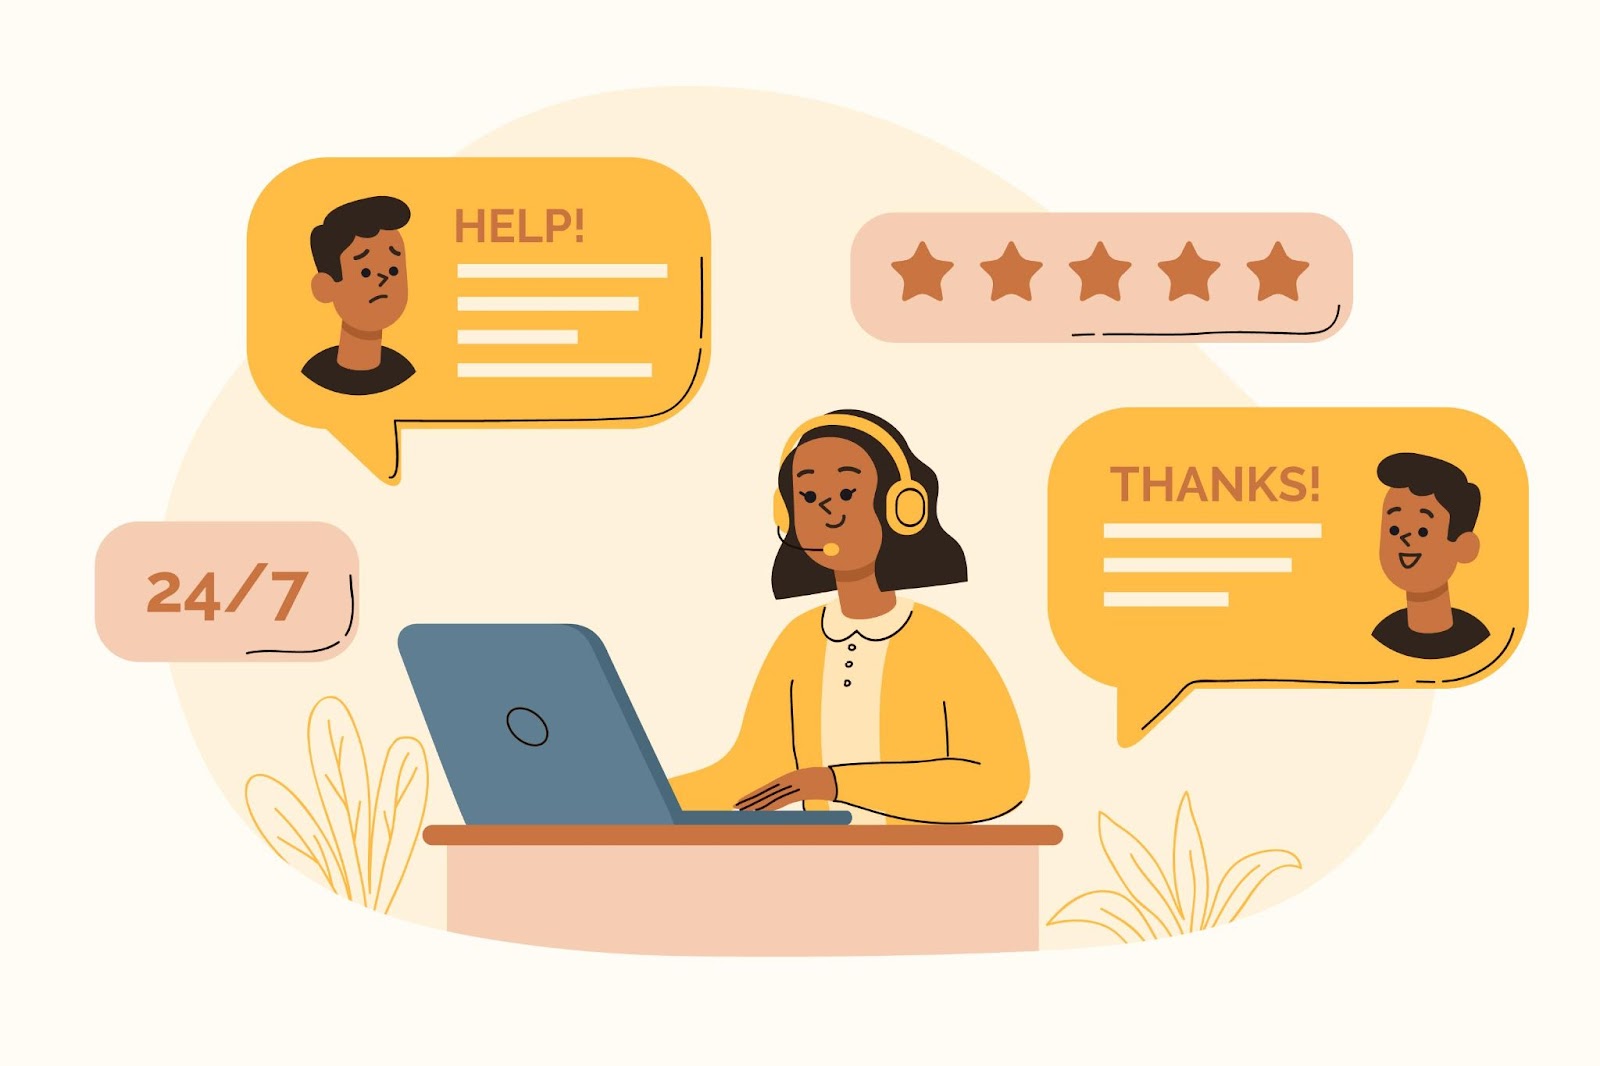 A team member connecting with clients to know their feedback.